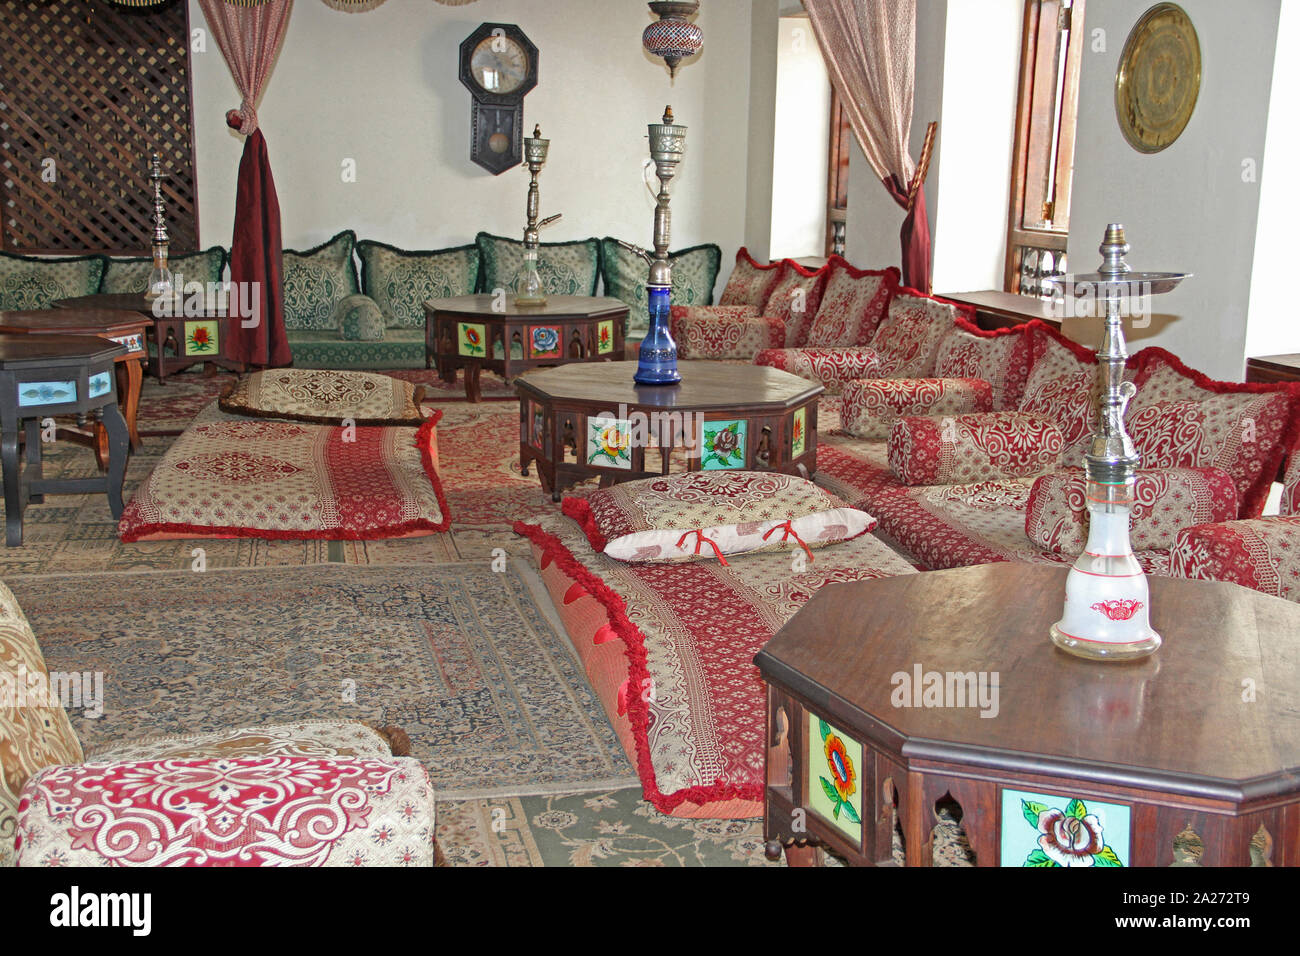 Couches and hookah pipes in a hotel lounge, Stone town, Zanzibar, Unguja Island, Tanzania. Stock Photo